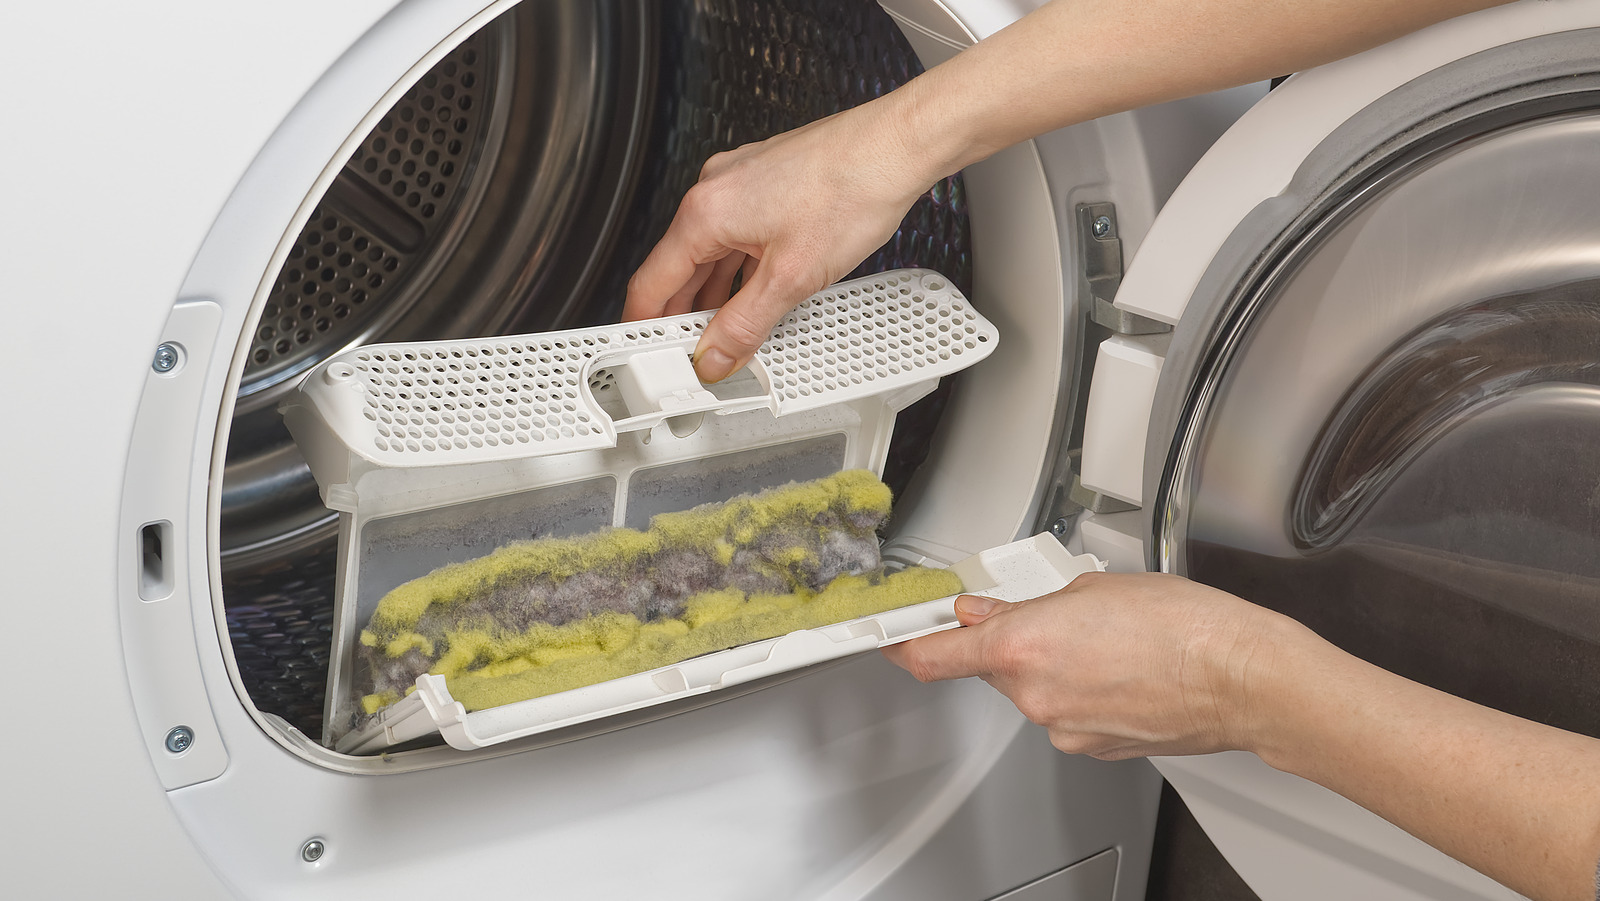 https://www.housedigest.com/img/gallery/the-kitchen-utensil-thatll-make-cleaning-your-lint-trap-a-breeze/l-intro-1690389334.jpg